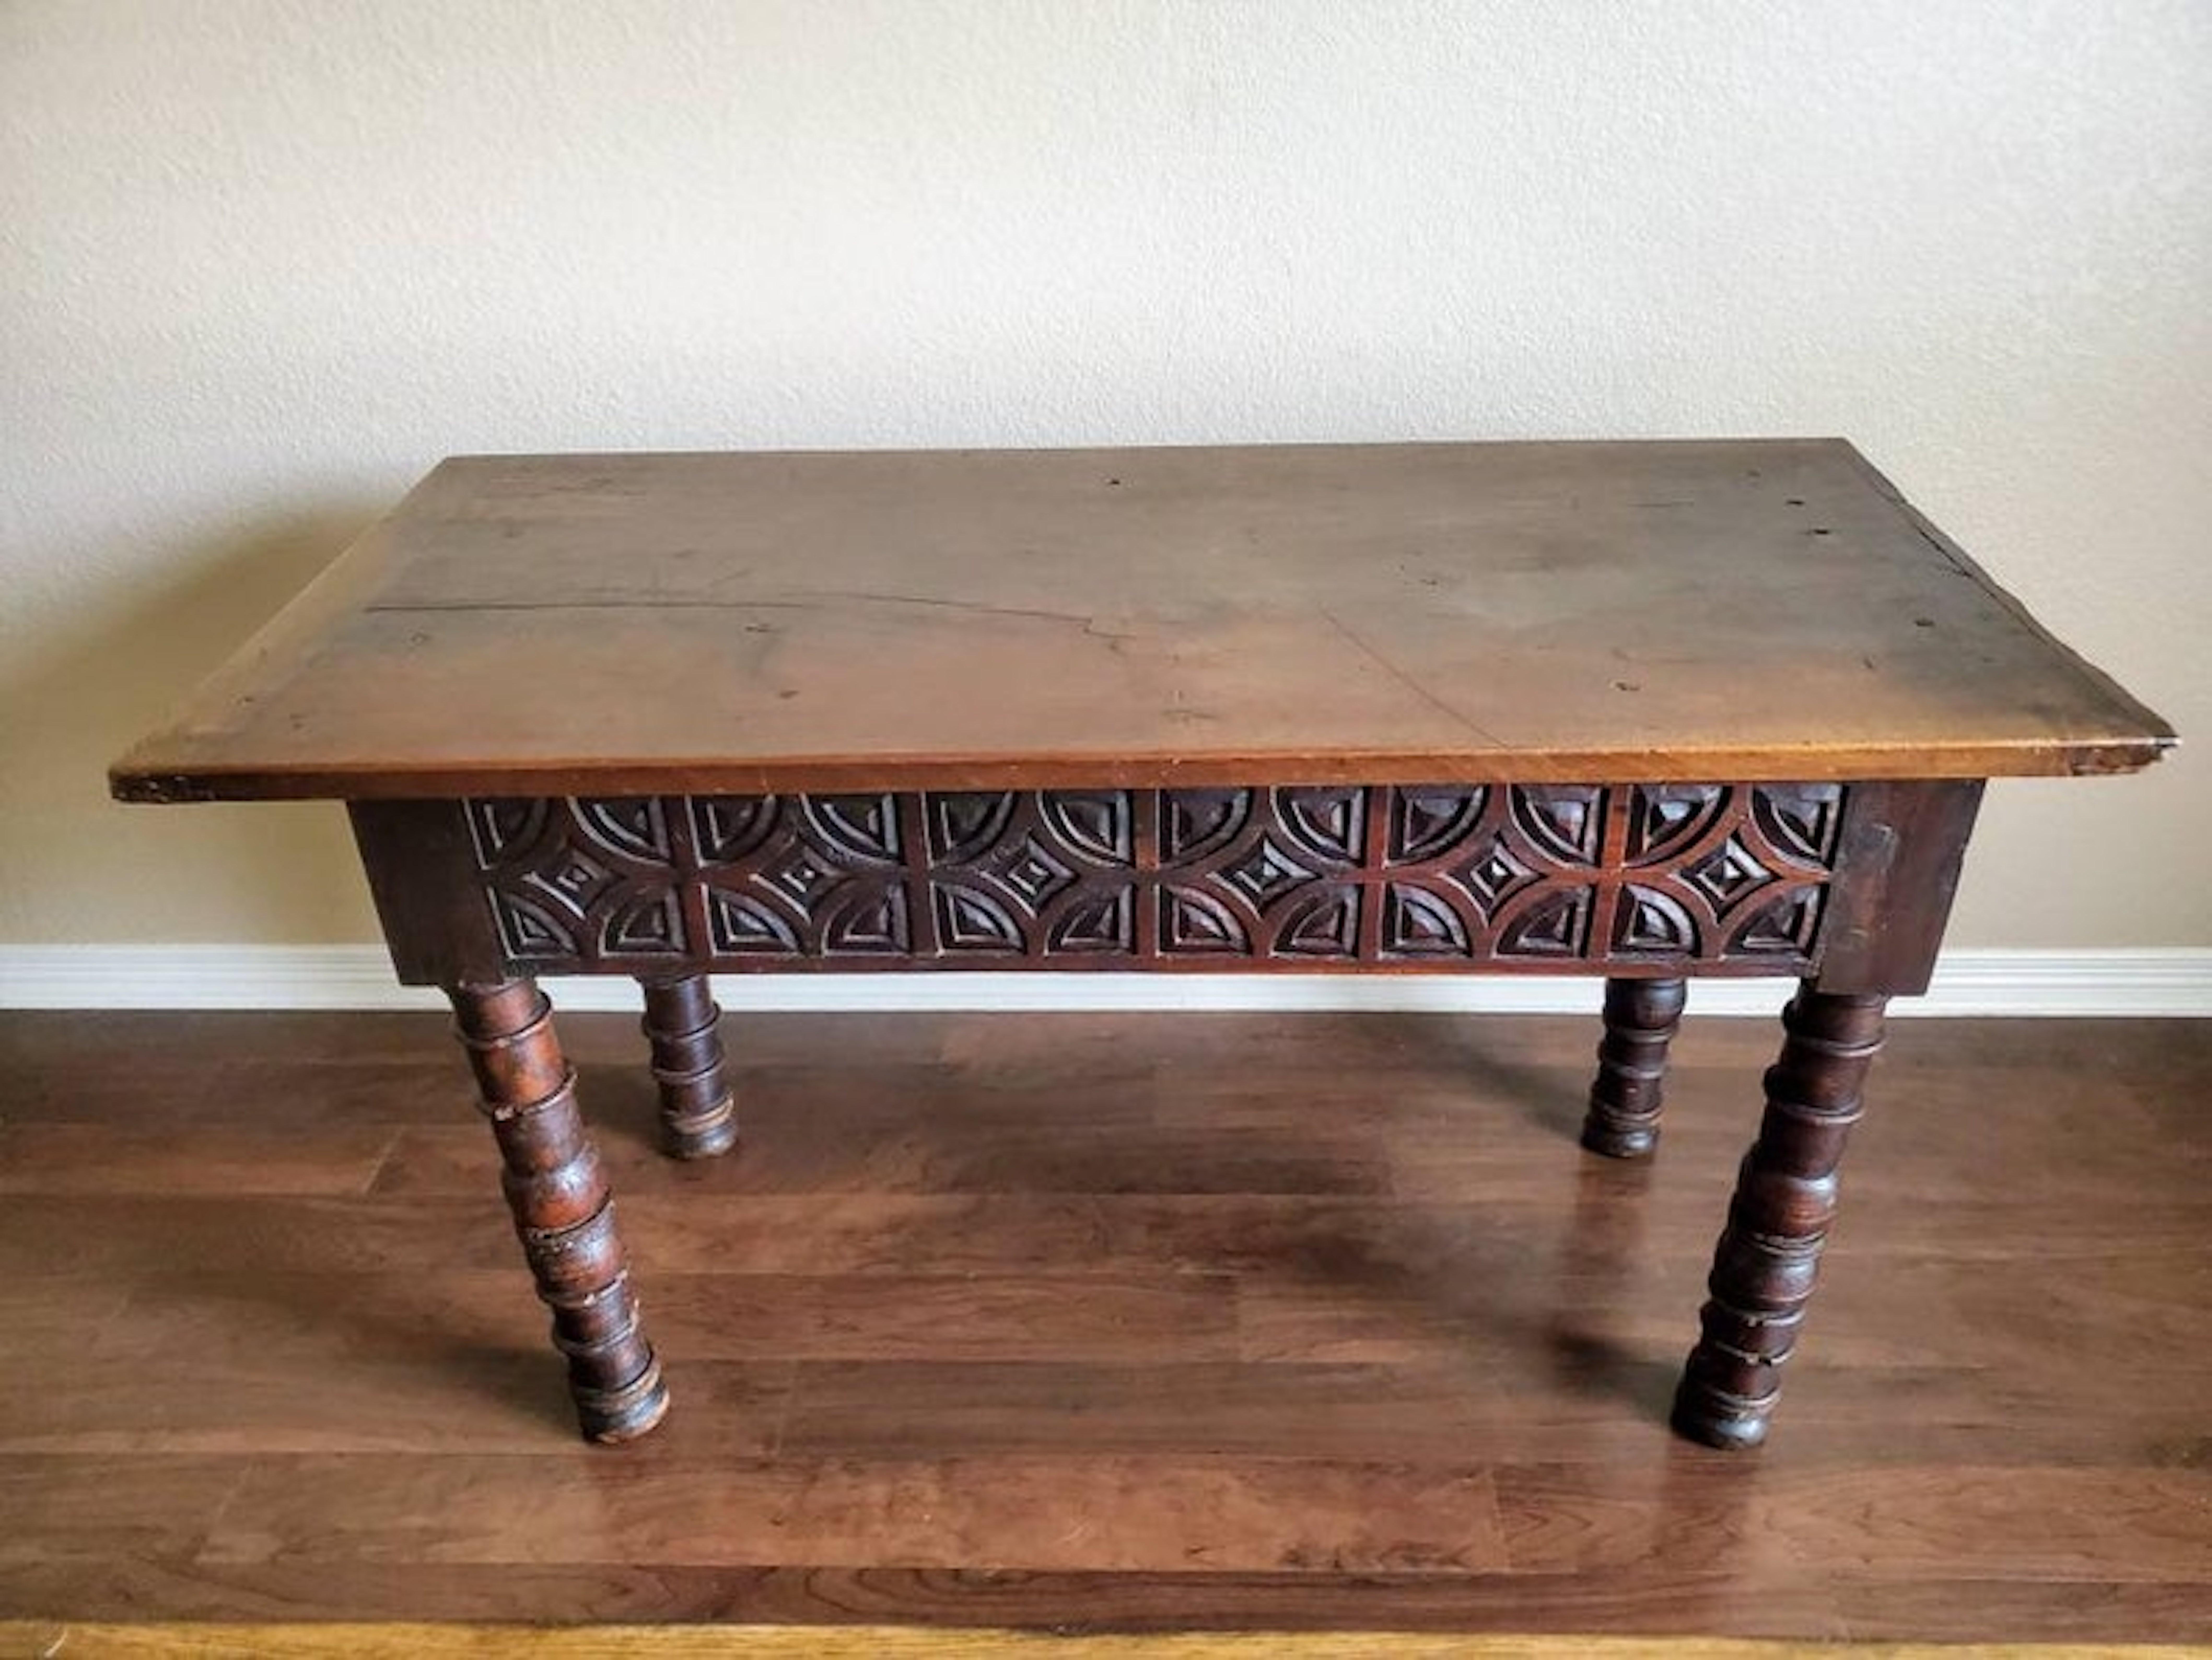 A remarkable one-of-a-kind Spanish Baroque Period hand carved walnut table with beautifully aged warm rustic distressed patina. 

Hand-crafted in Spain in the first half of the 18th century, with later architectural elements, having a rectangular